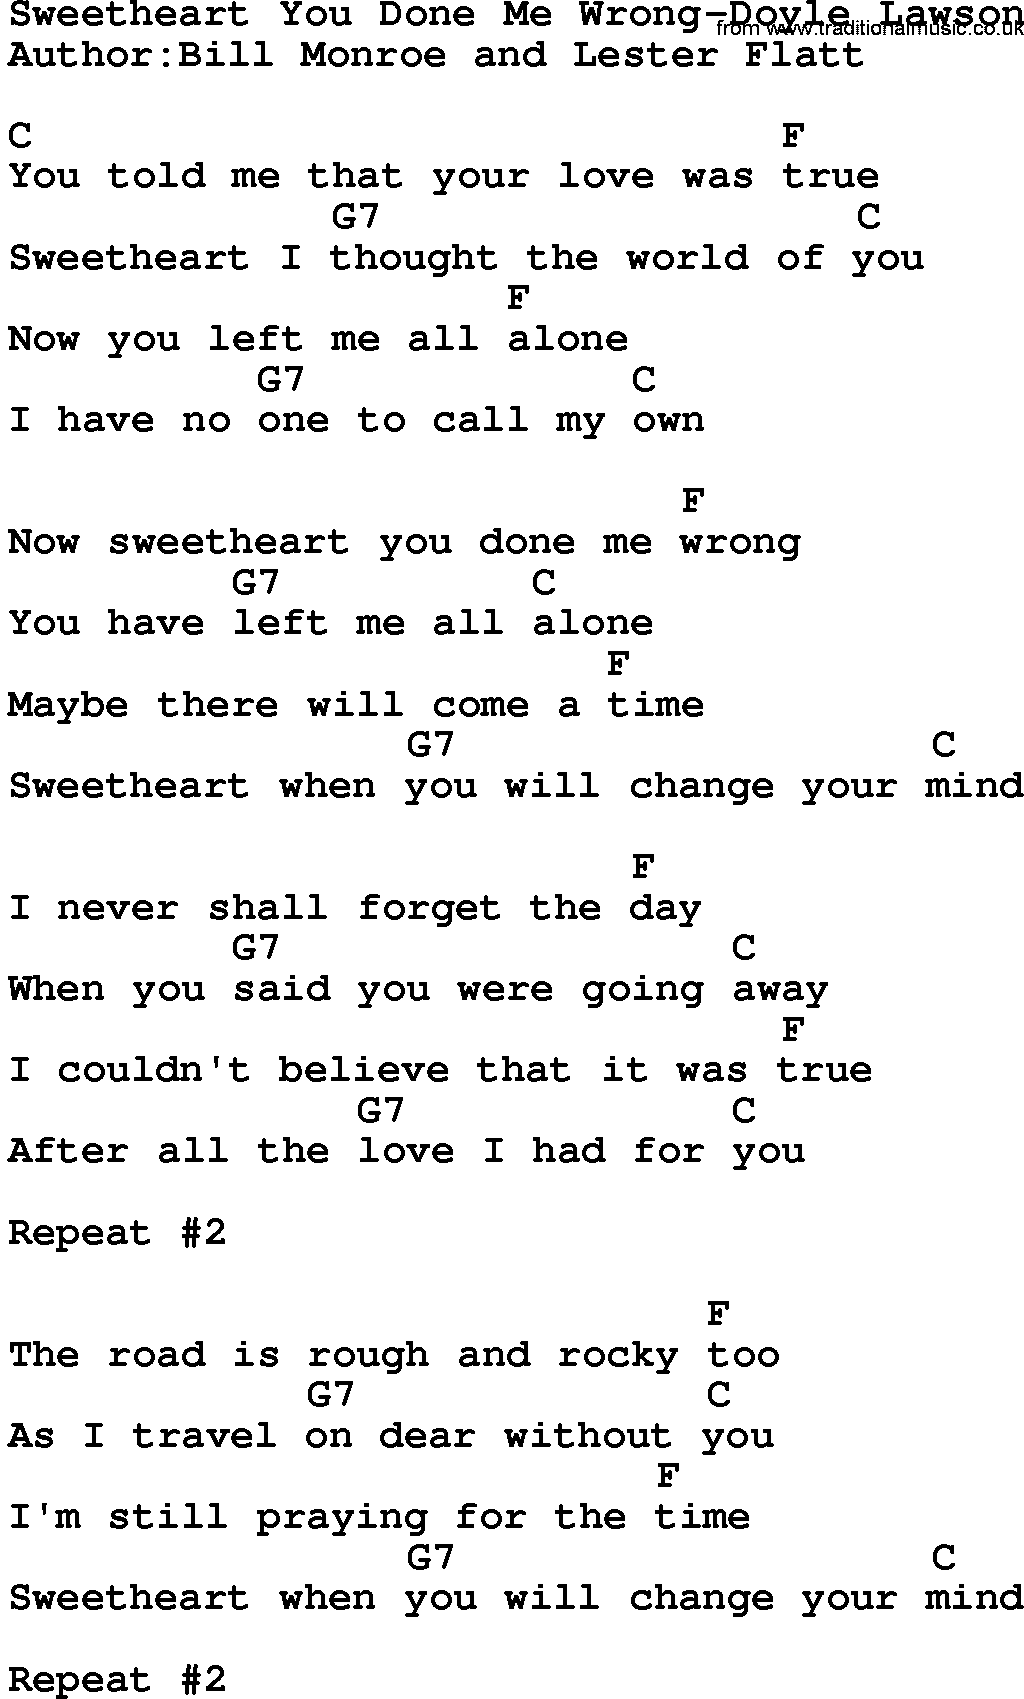 Country music song: Sweetheart You Done Me Wrong-Doyle Lawson lyrics and chords